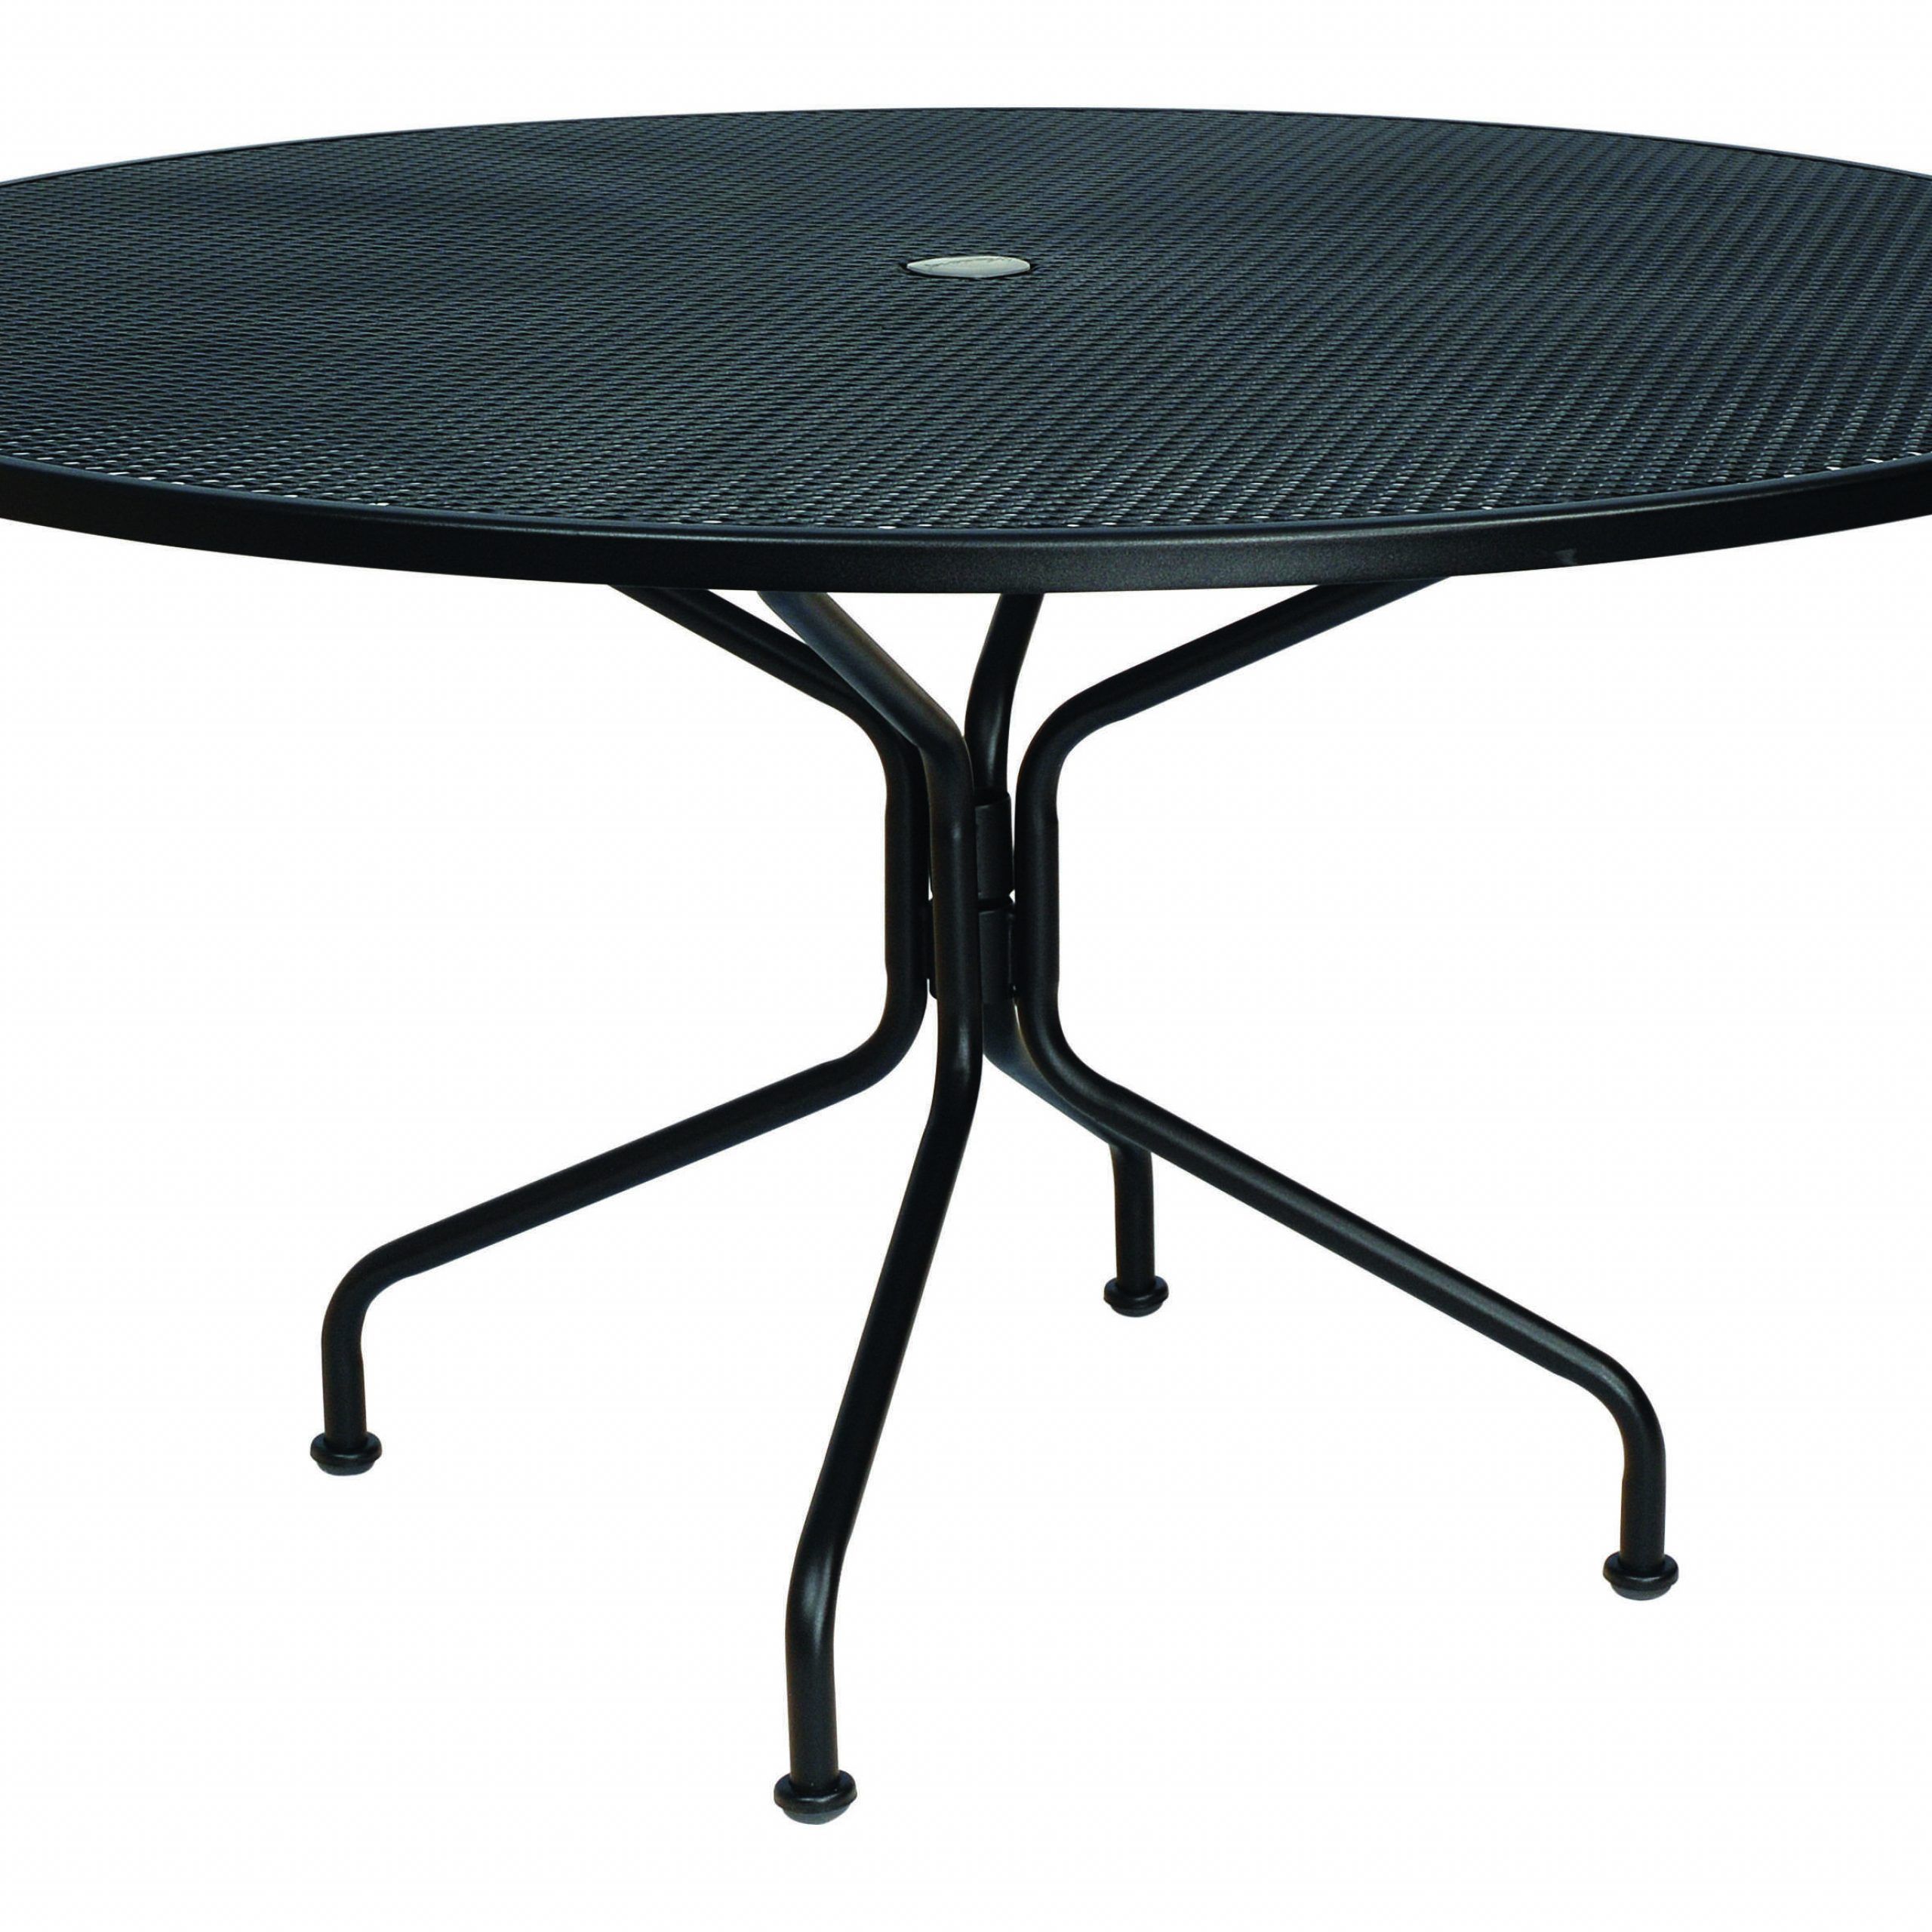 Woodard Wrought Iron 54 Round 8 Spoke Table With Umbrella Hole Pertaining To Latest Aztec Round Pedestal Dining Tables (View 22 of 25)